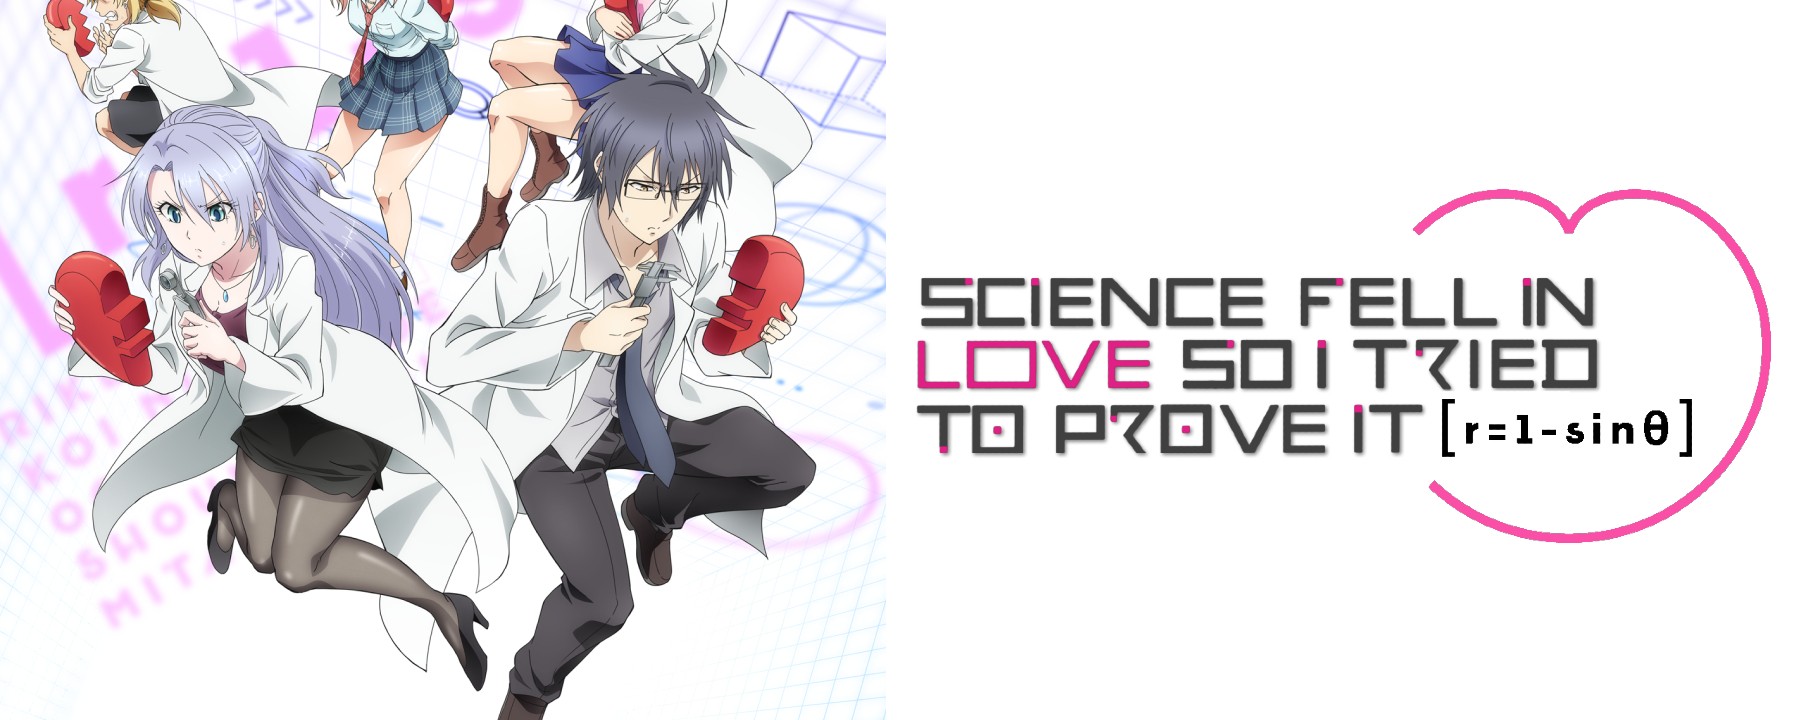 Science Fell in Love, So I Tried to Prove It Season 2 Reveals